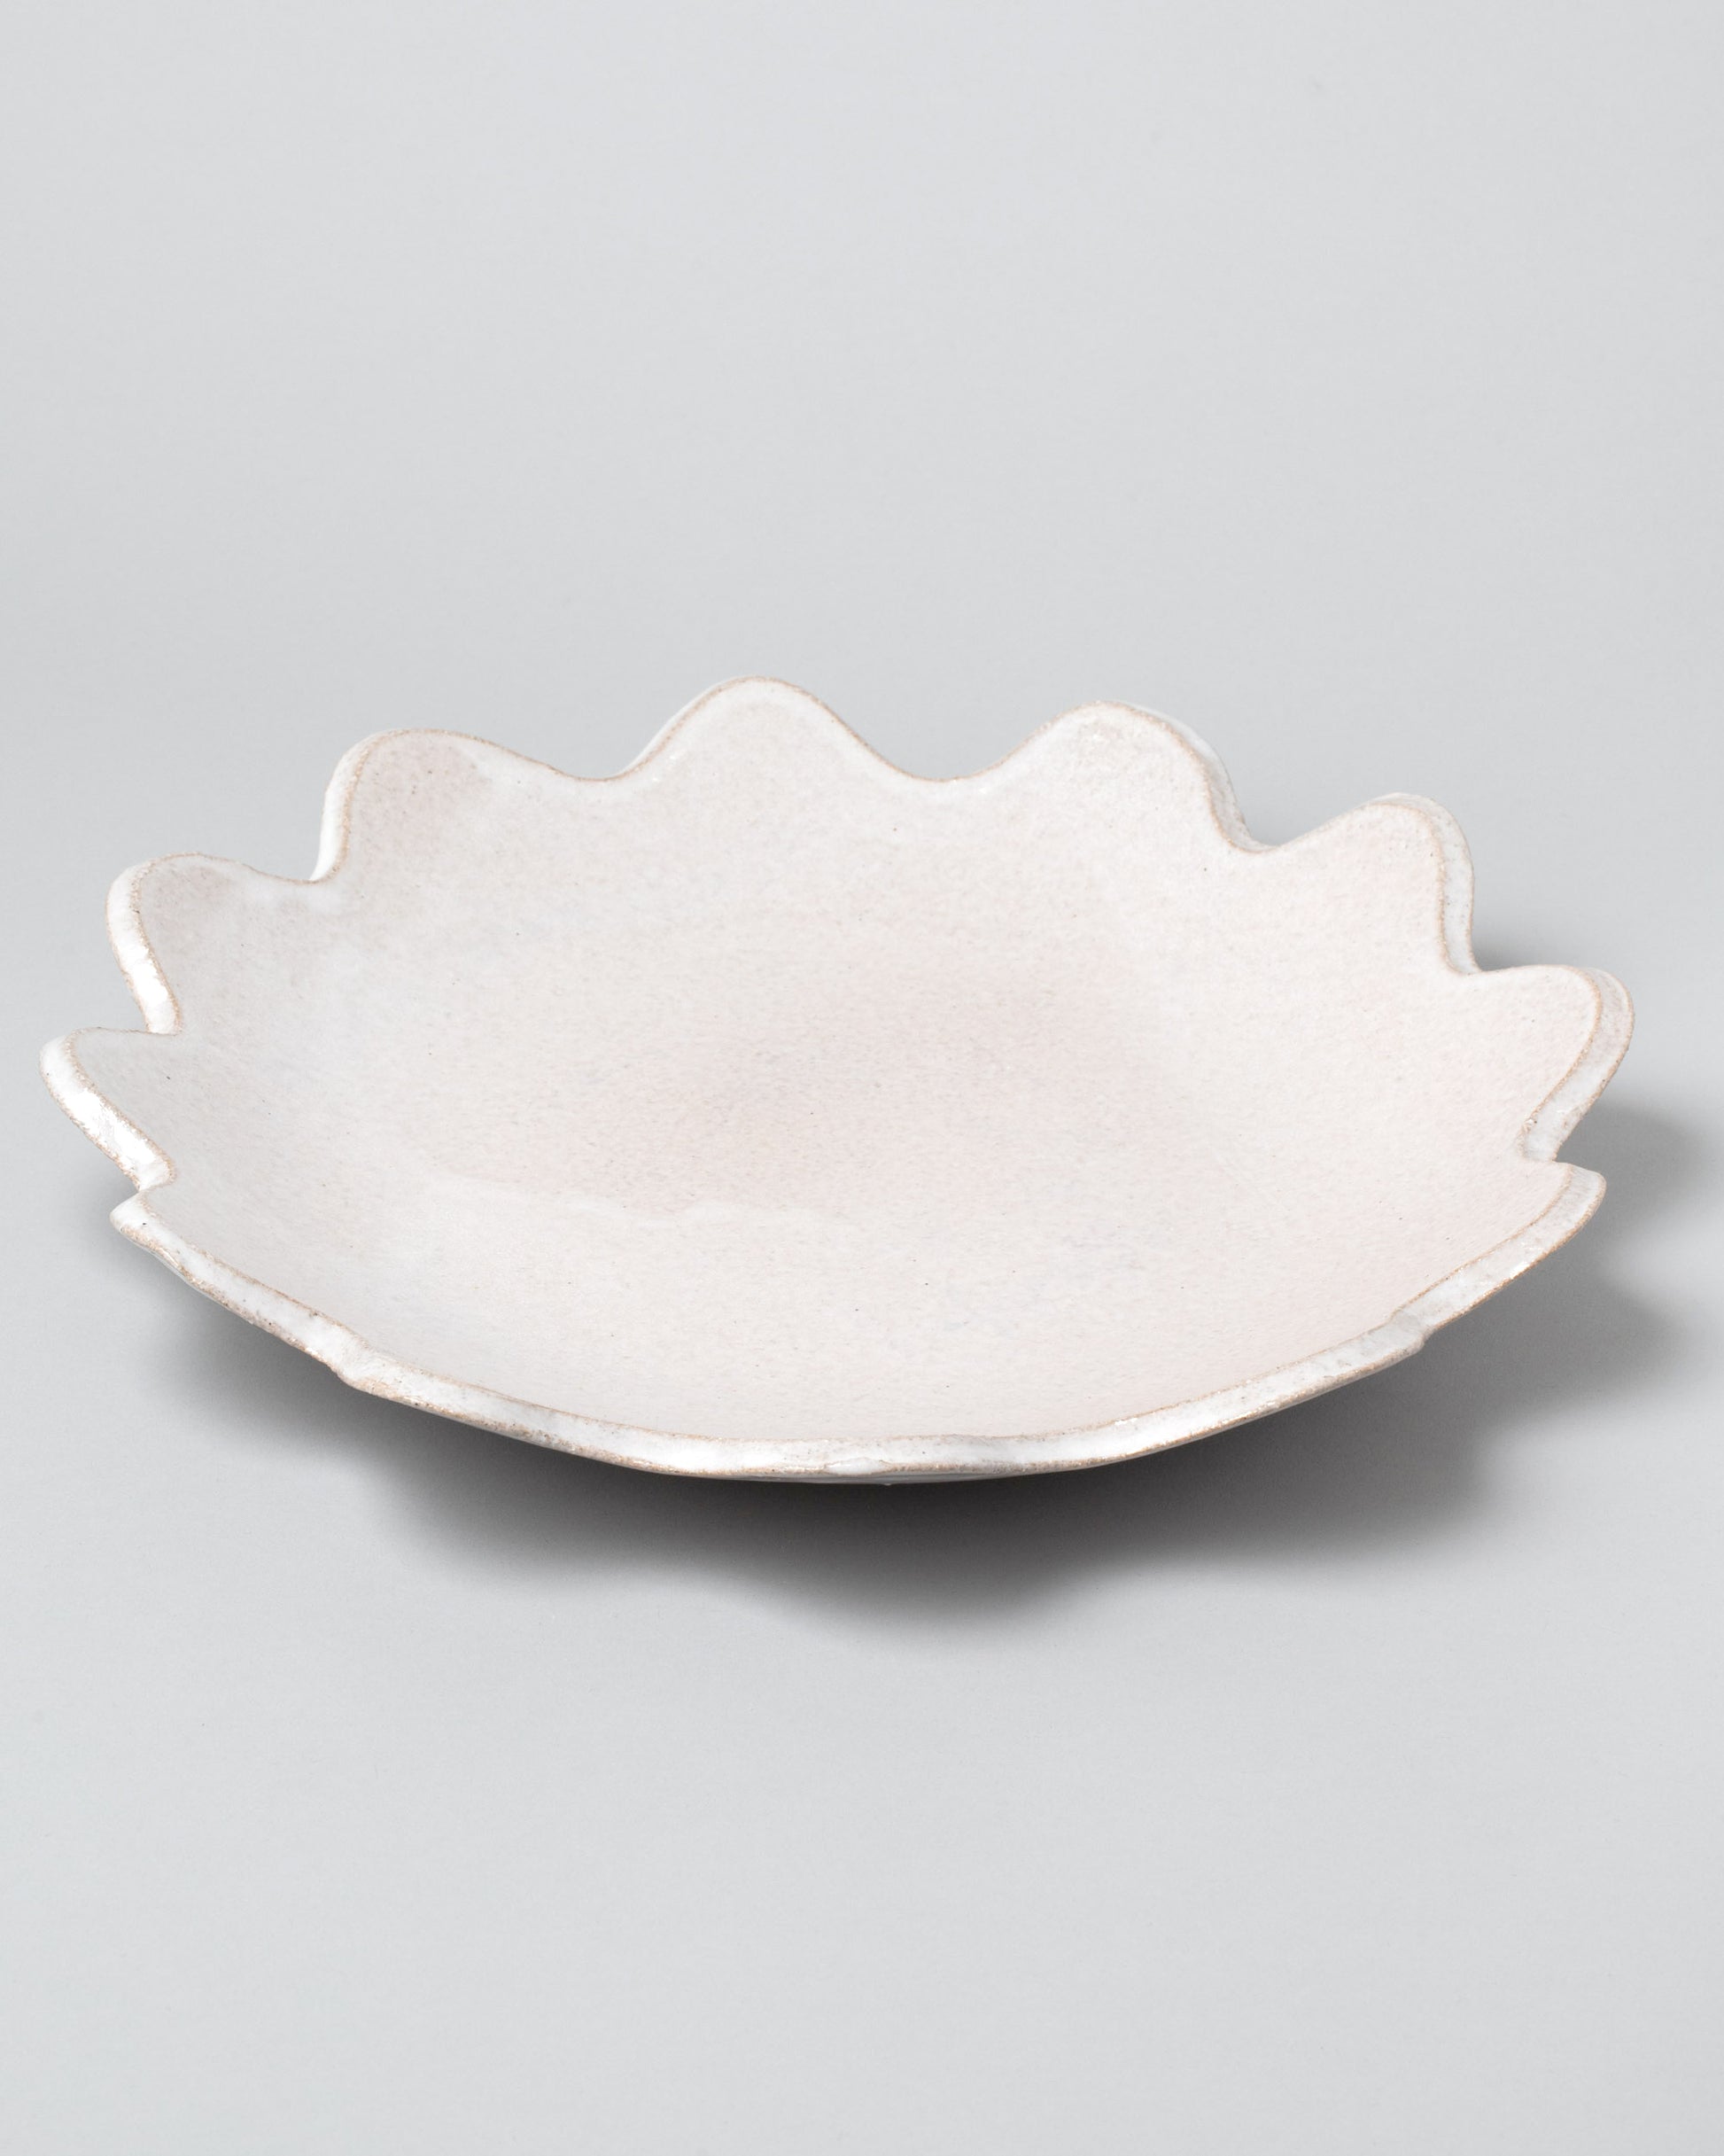 Morgan Peck Pearl Scallop Platter on light color background.